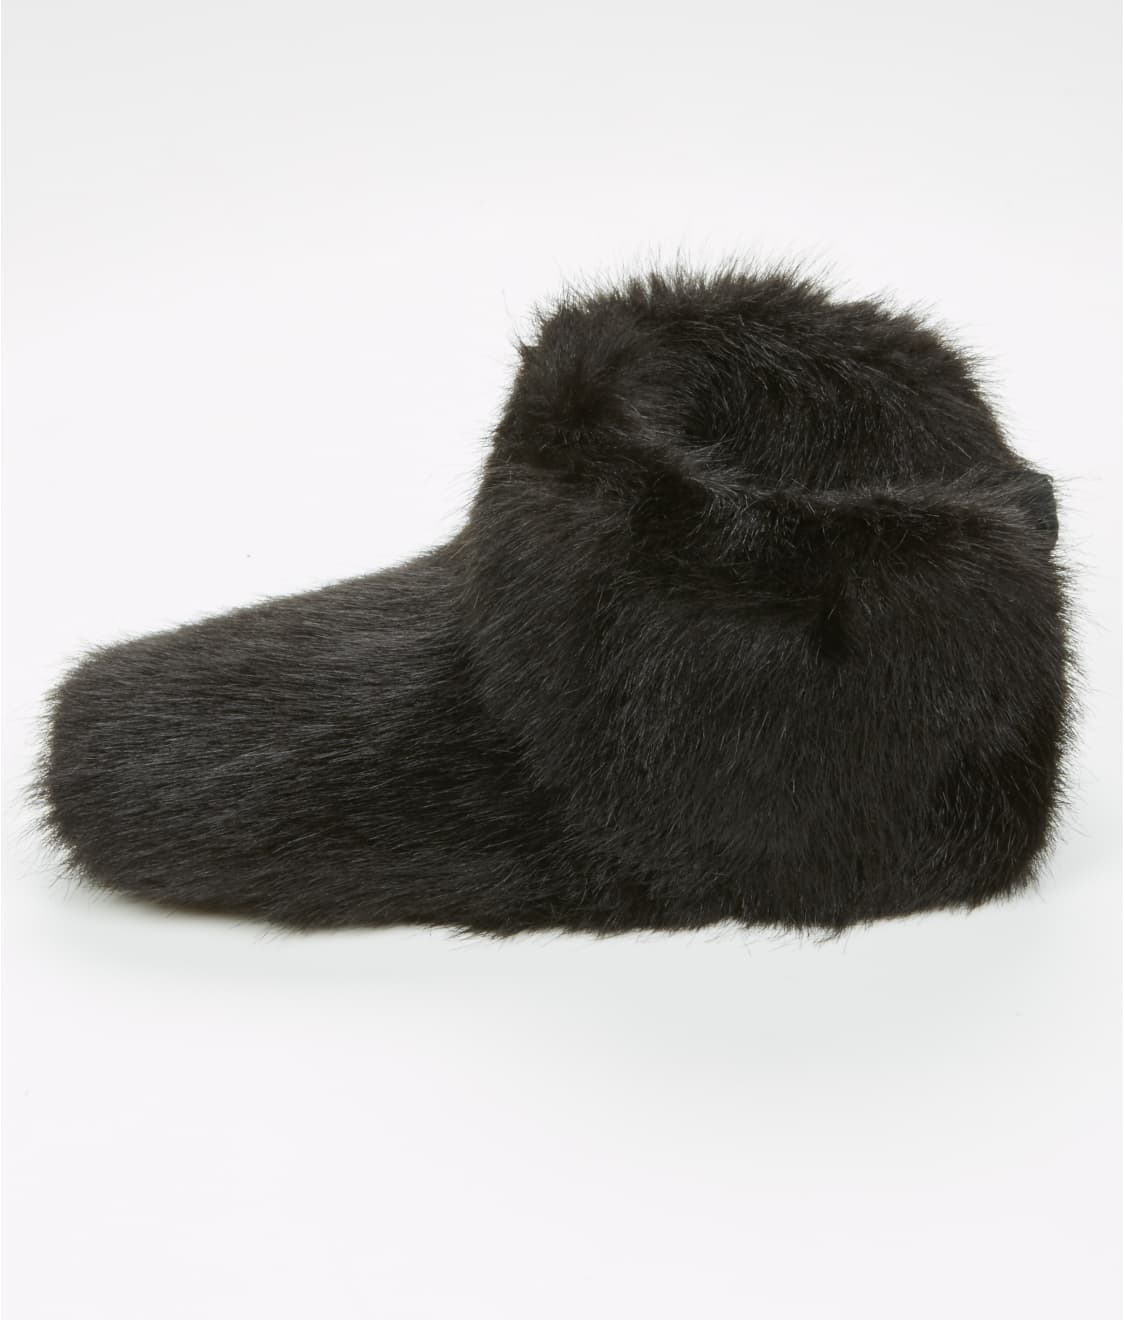 UGG Amary Fur Bootie Slippers & Reviews | Bare Necessities (Style 1103861)